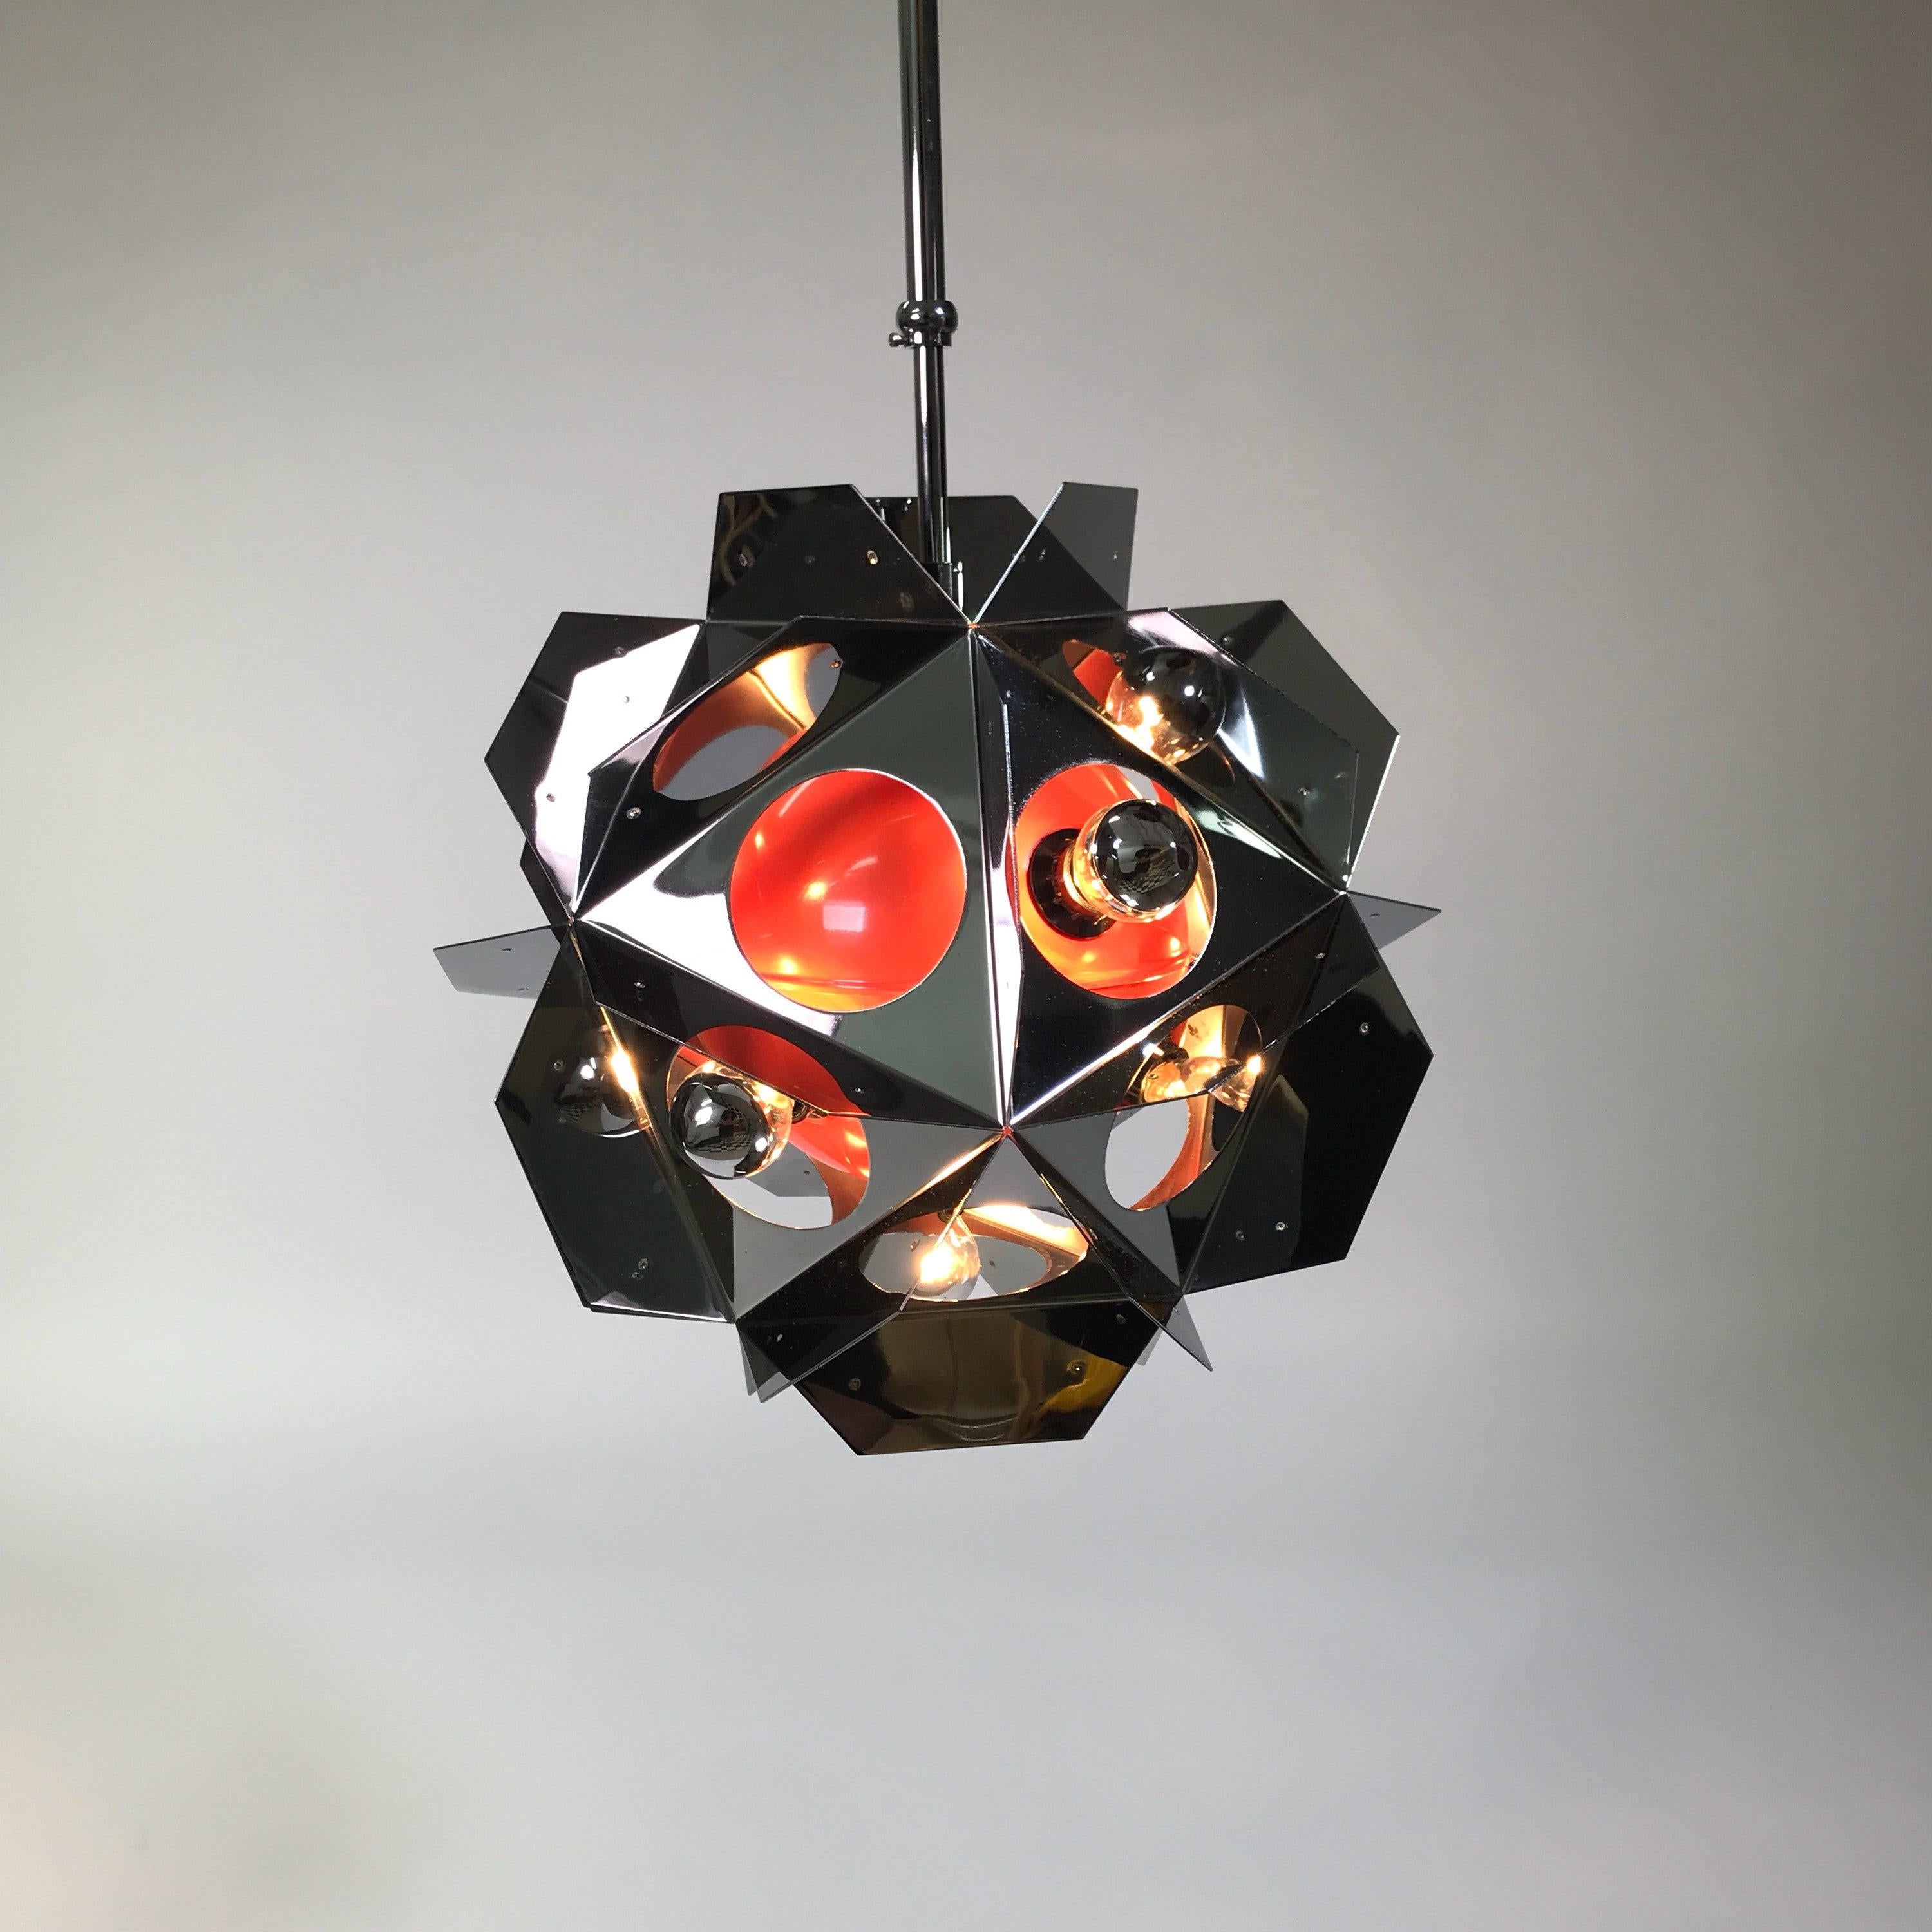 The beautiful and well built ceiling light or chandelier by Paul De Haan is probably designed around start of the century.

“4th floor” is the name of the light and Paul De Haan got inspired by a design hotel in Madrid which has a sharp geometric